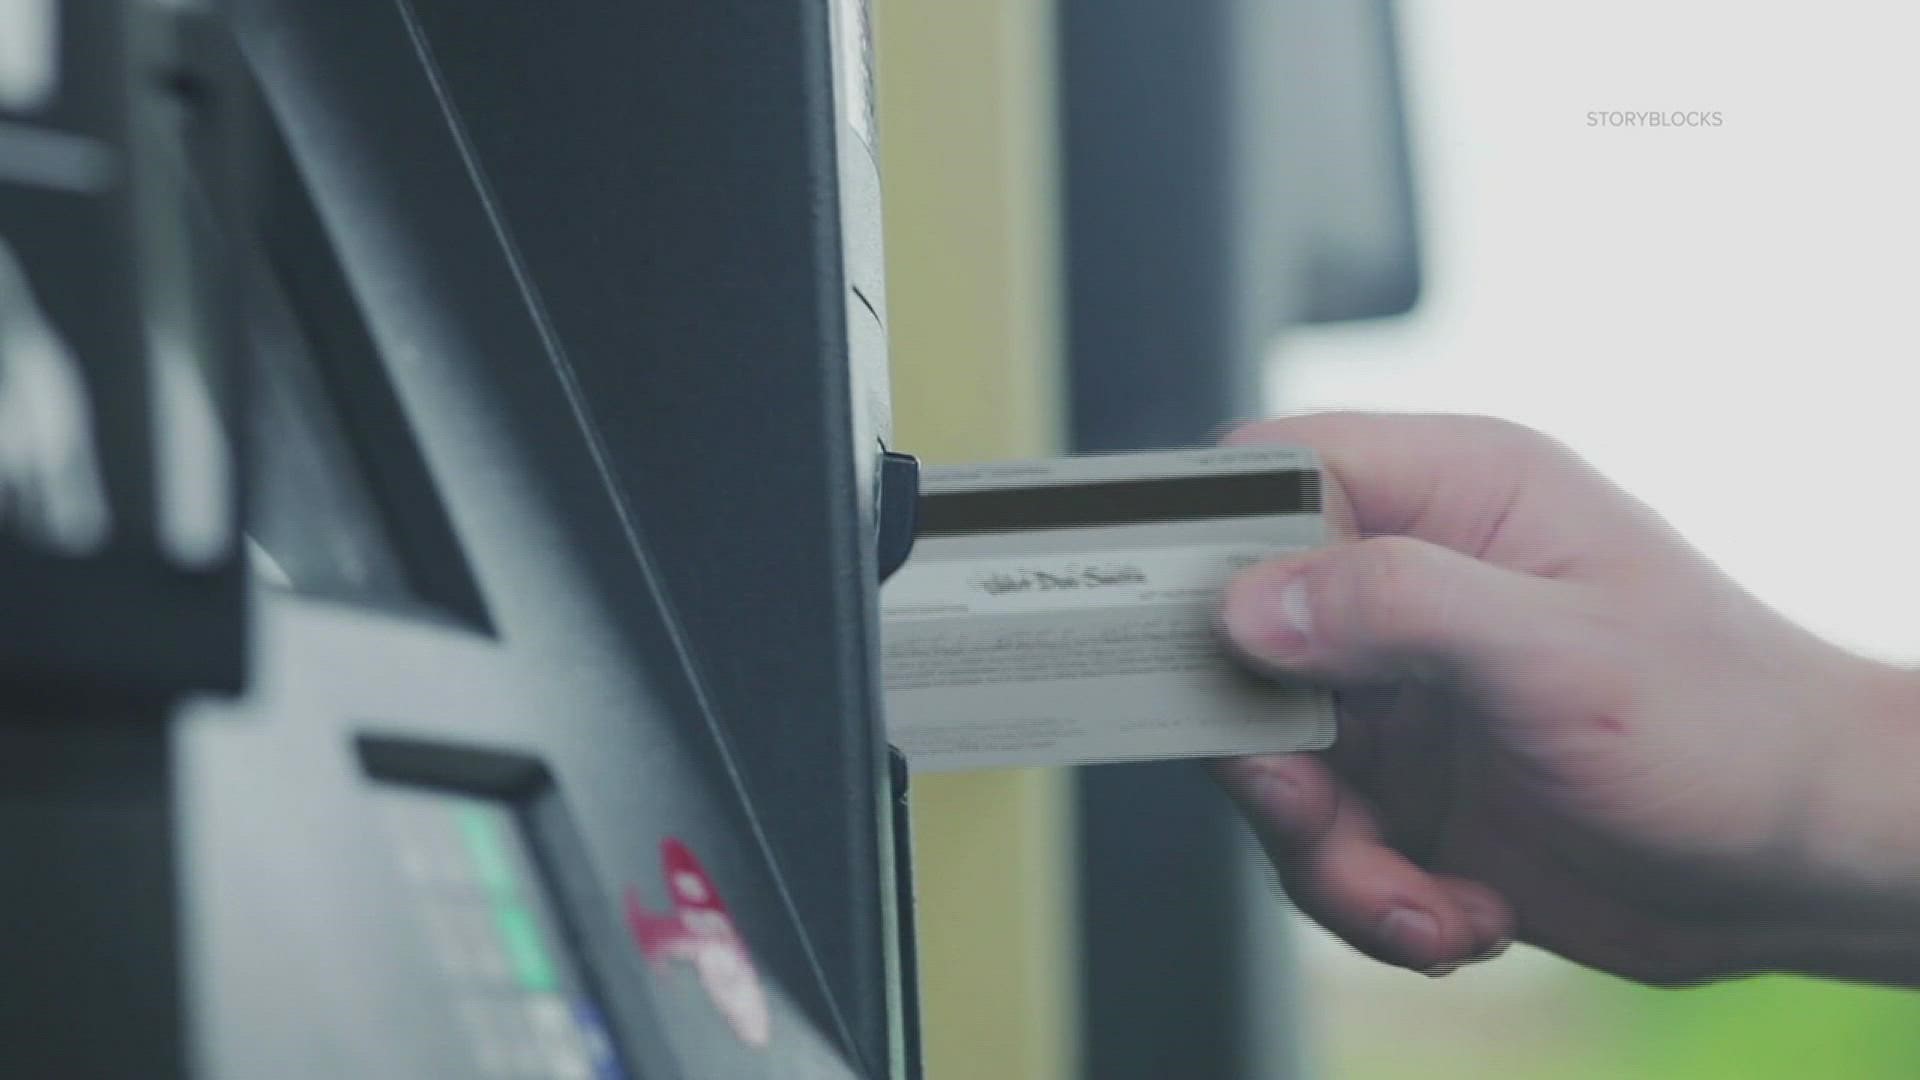 When using a card to make a purchase at the pump, the merchant pays a fee to the card network operator.